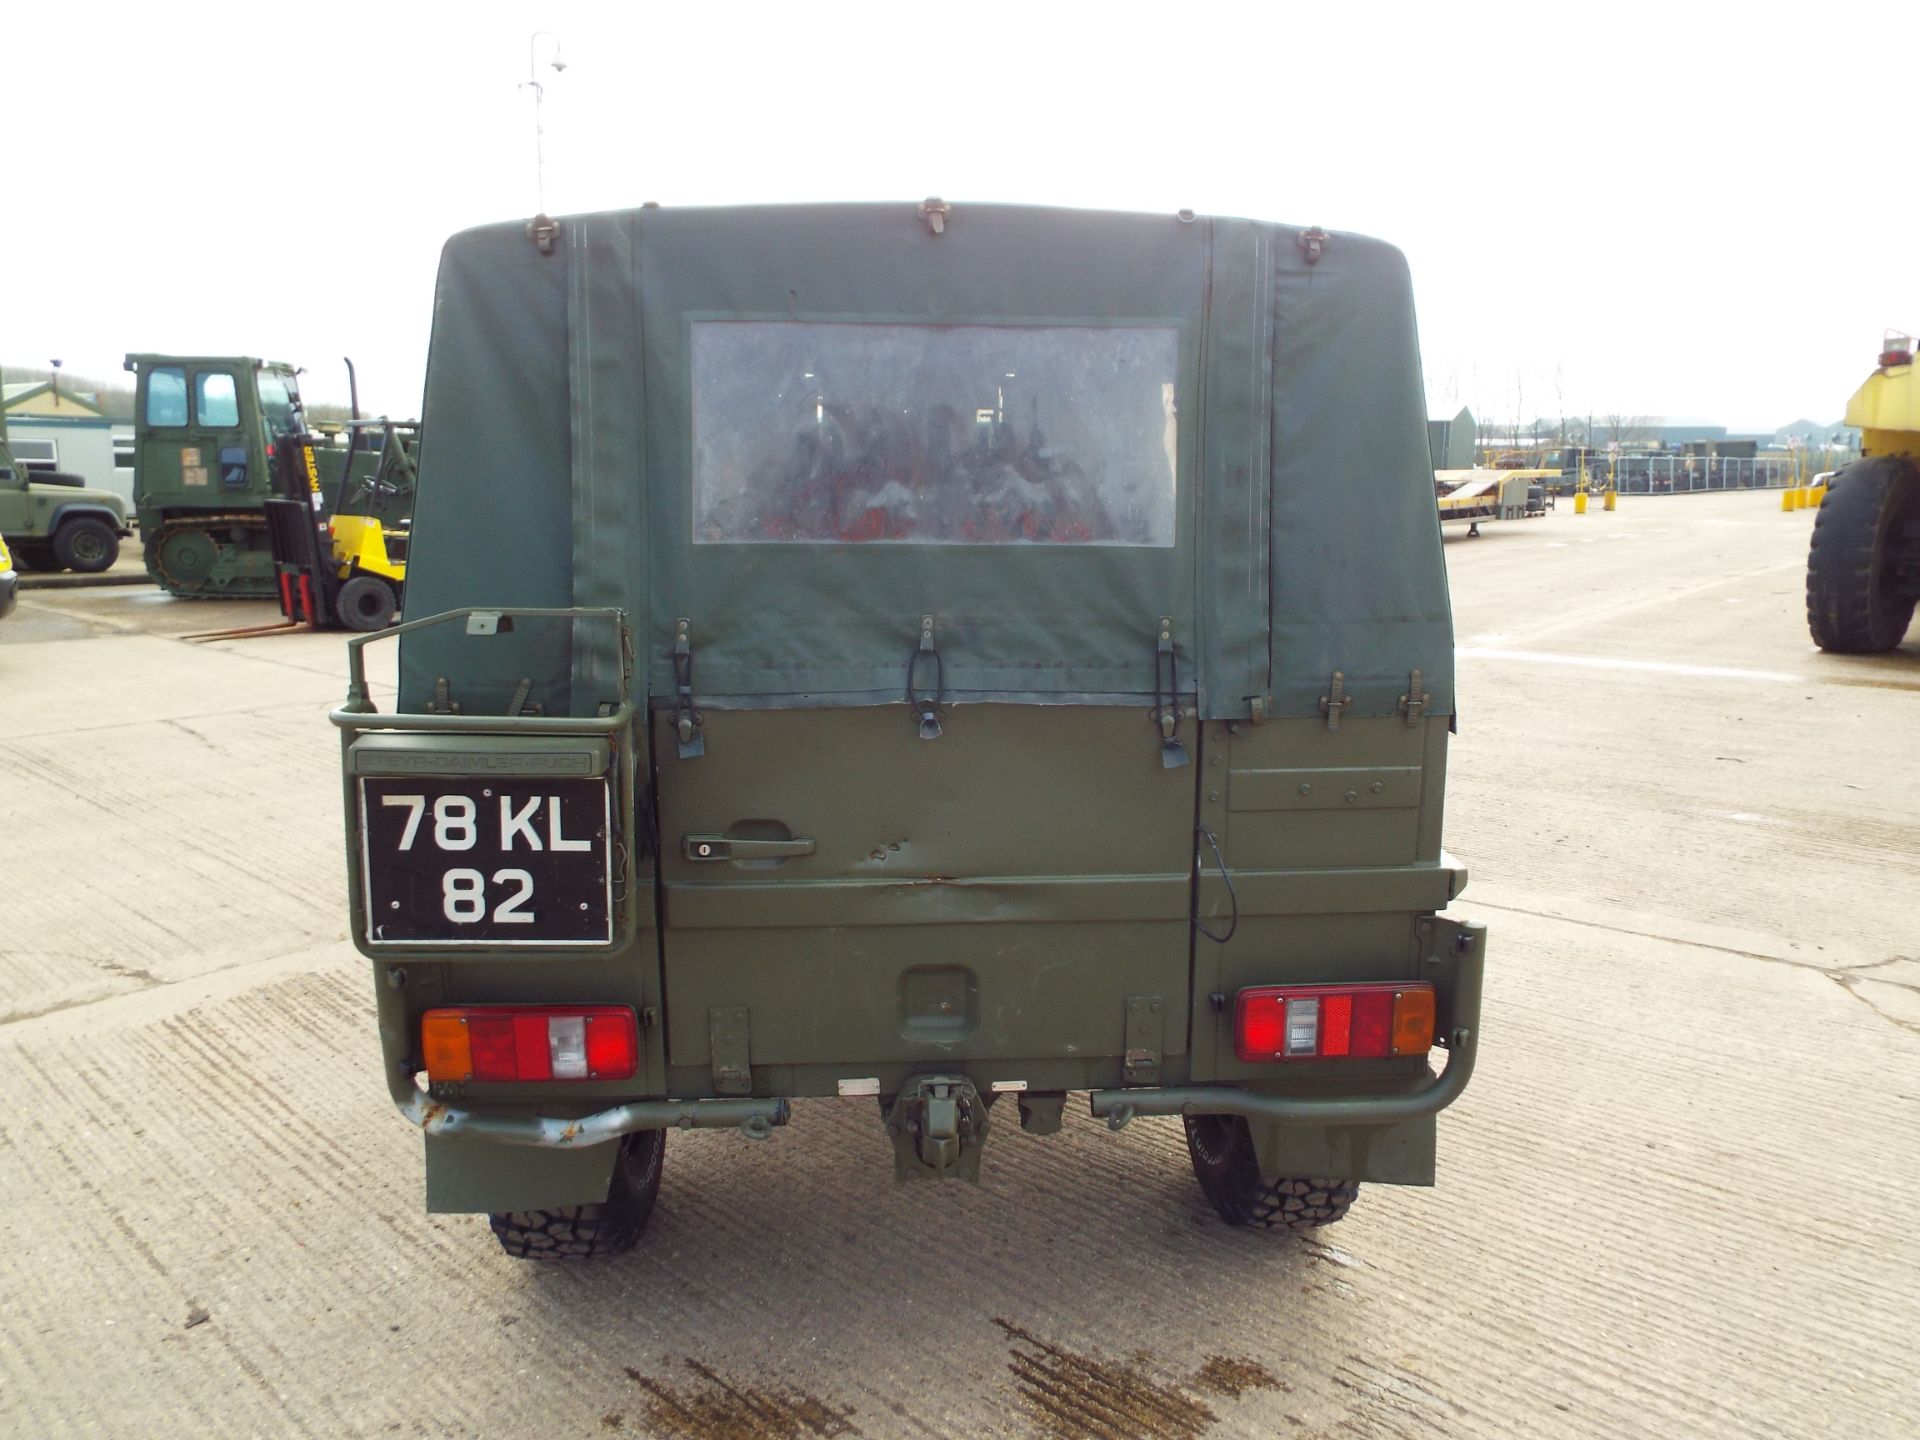 Military Specification Pinzgauer 4X4 Soft Top - Image 6 of 25